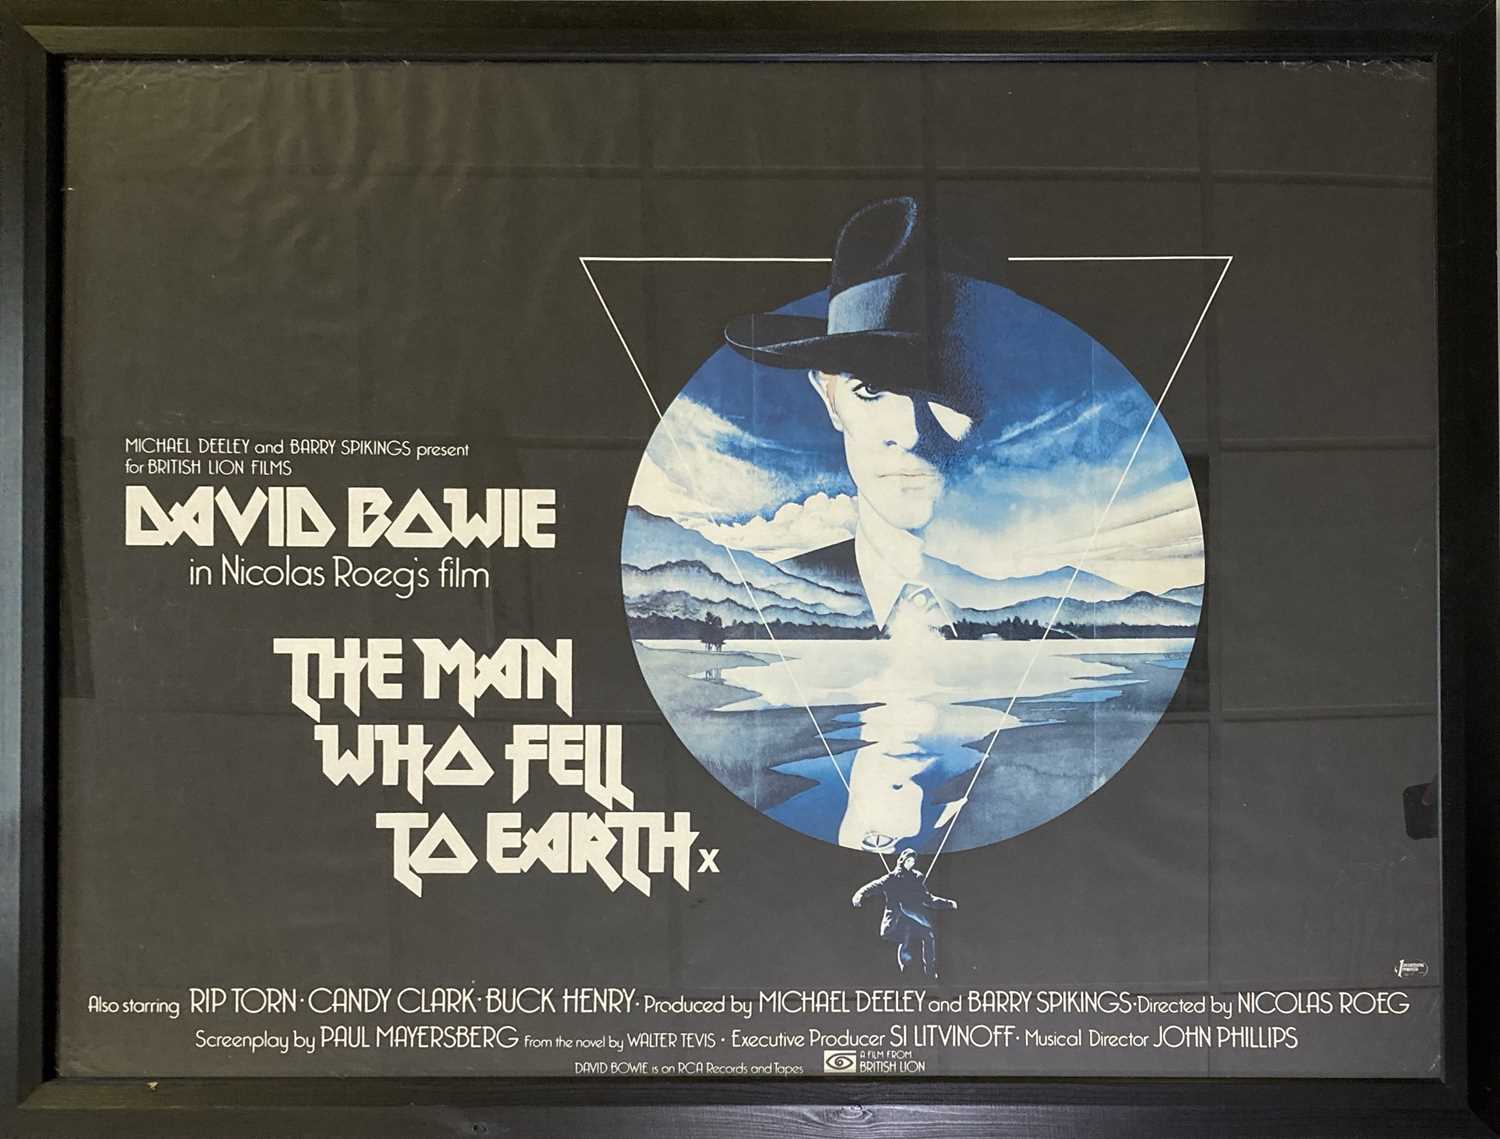 Lot 49 - DAVID BOWIE THE MAN WHO FELL TO EARTH ORIGINAL UK QUAD FILM POSTER.